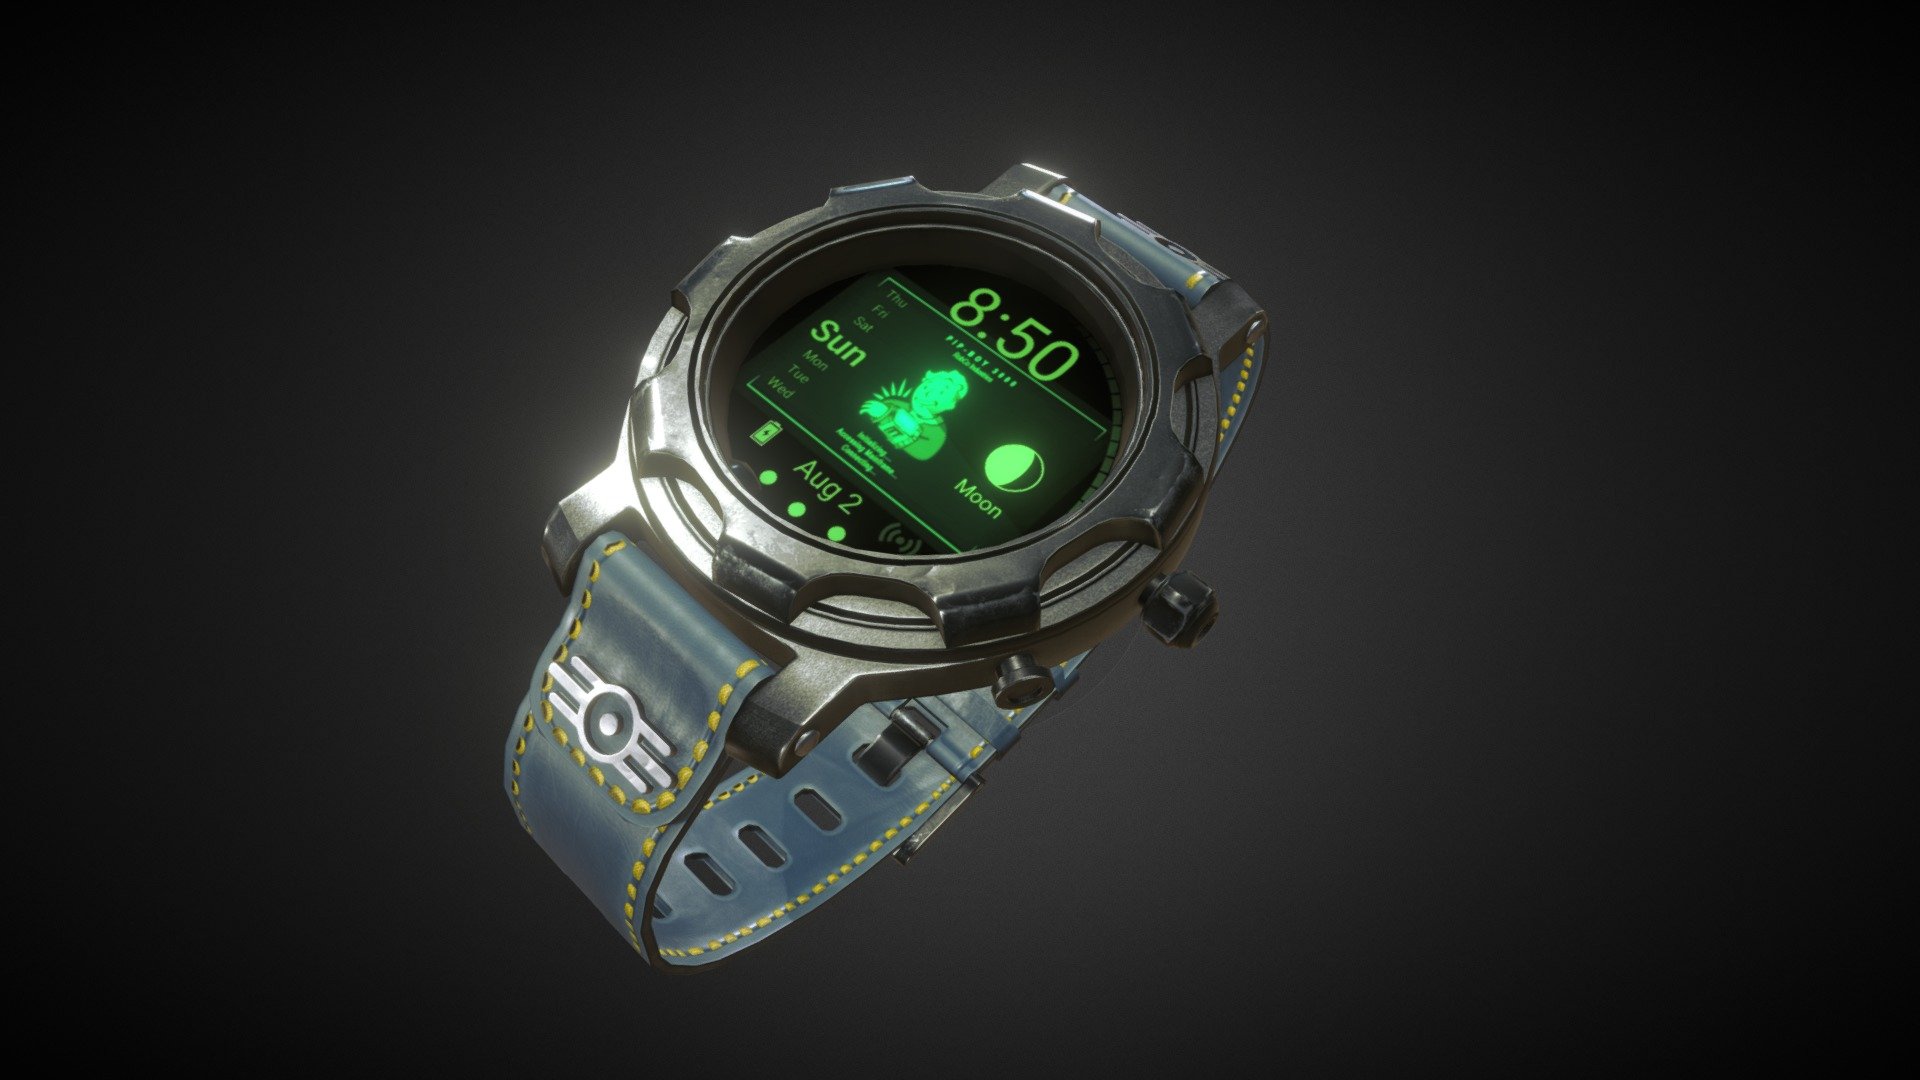 Fallout 4 fan art: Vault 111 Watch.
This will be a mod, on Nexus soon!
More images and info, here: https://www.artstation.com/artwork/oPYKB - Vault 111 Watch: Fallout - Buy Royalty Free 3D model by Kaspars Pavlovskis (@kaspars_3d) 3d model